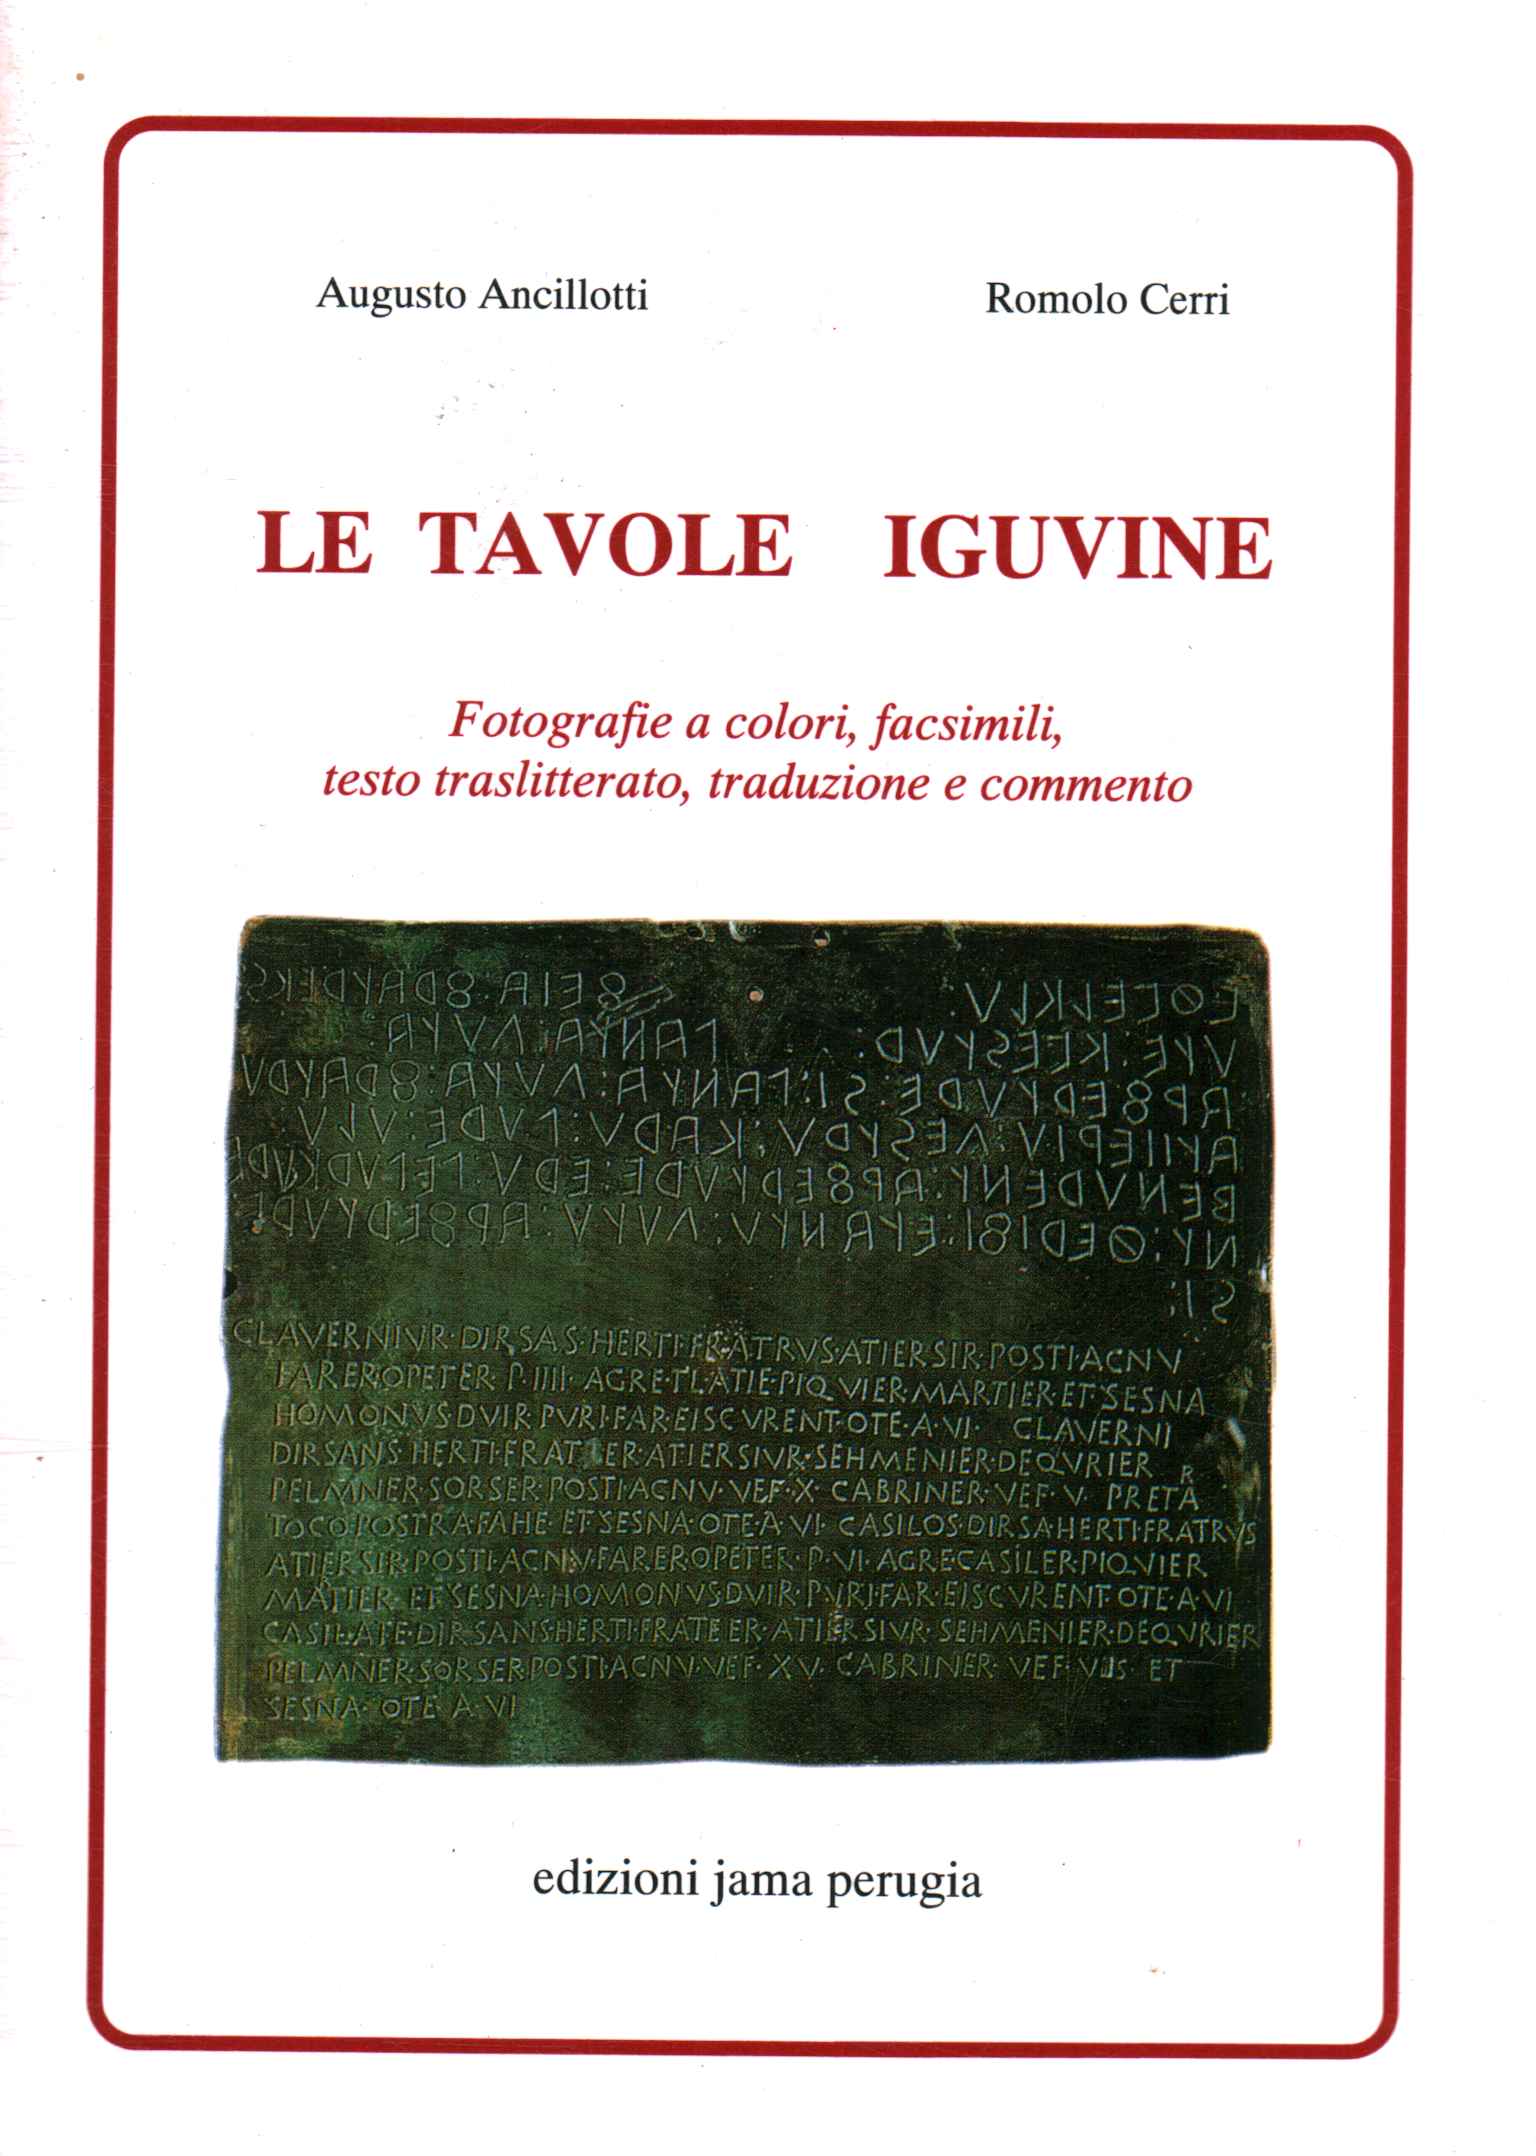 The iguvine tables